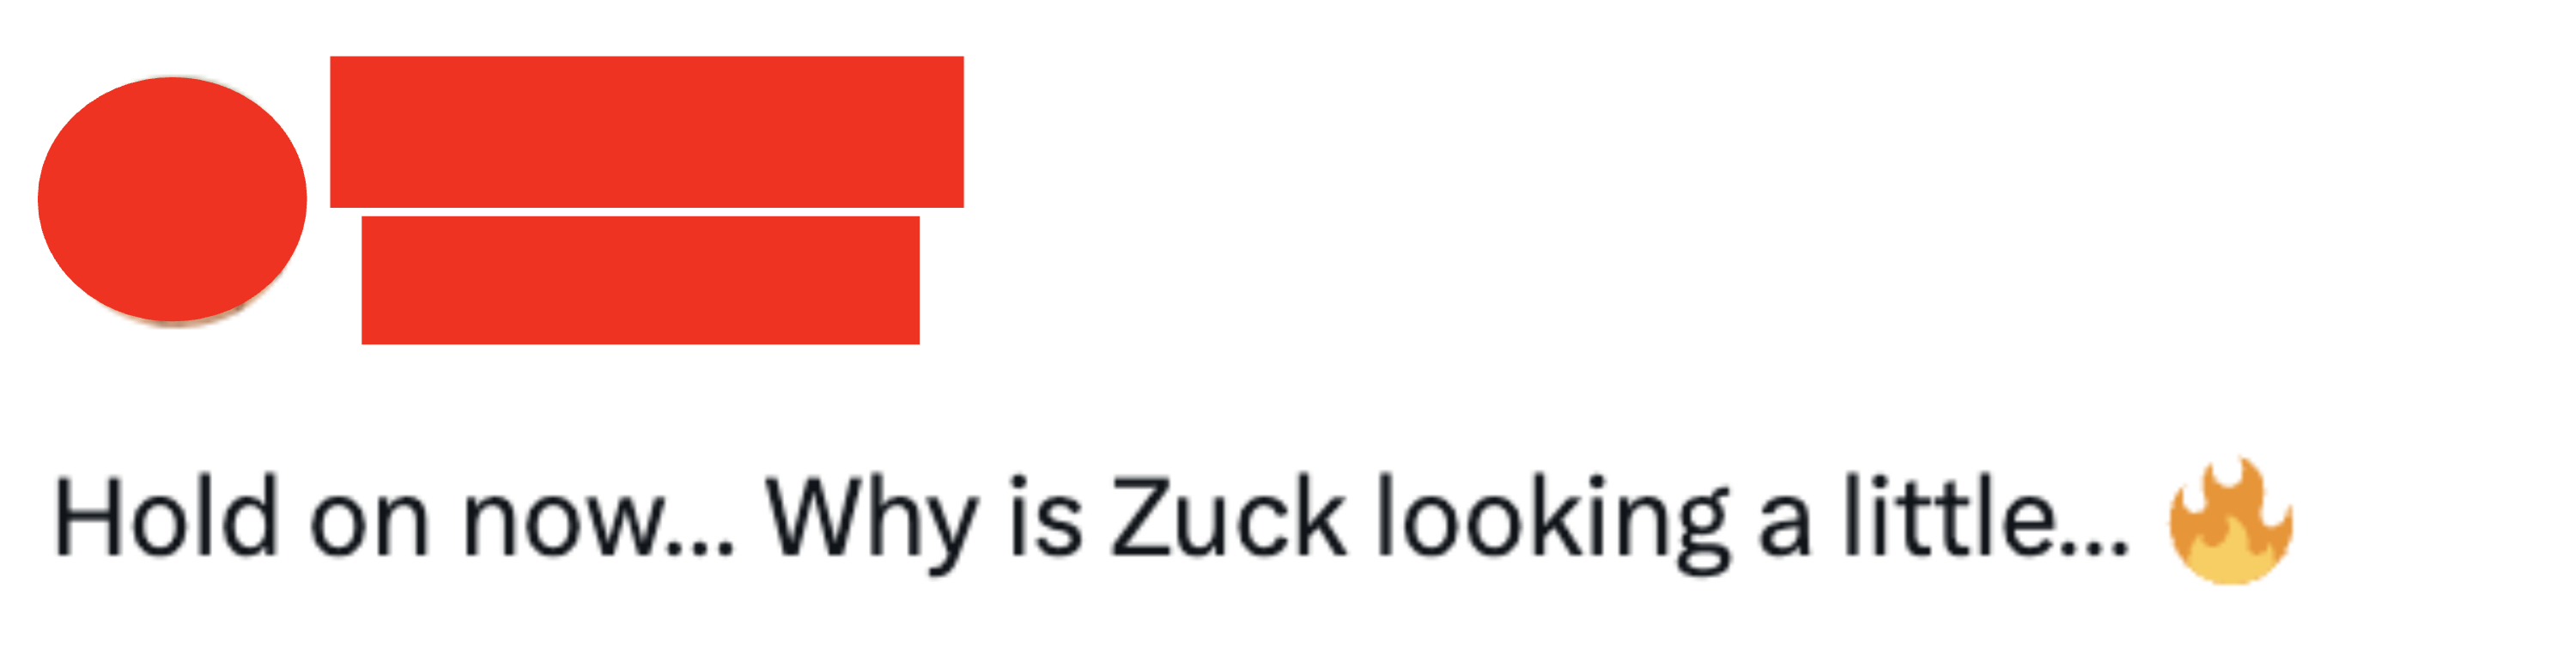 Hold on now...Why is Zuck looking a little.... (fire emoji)